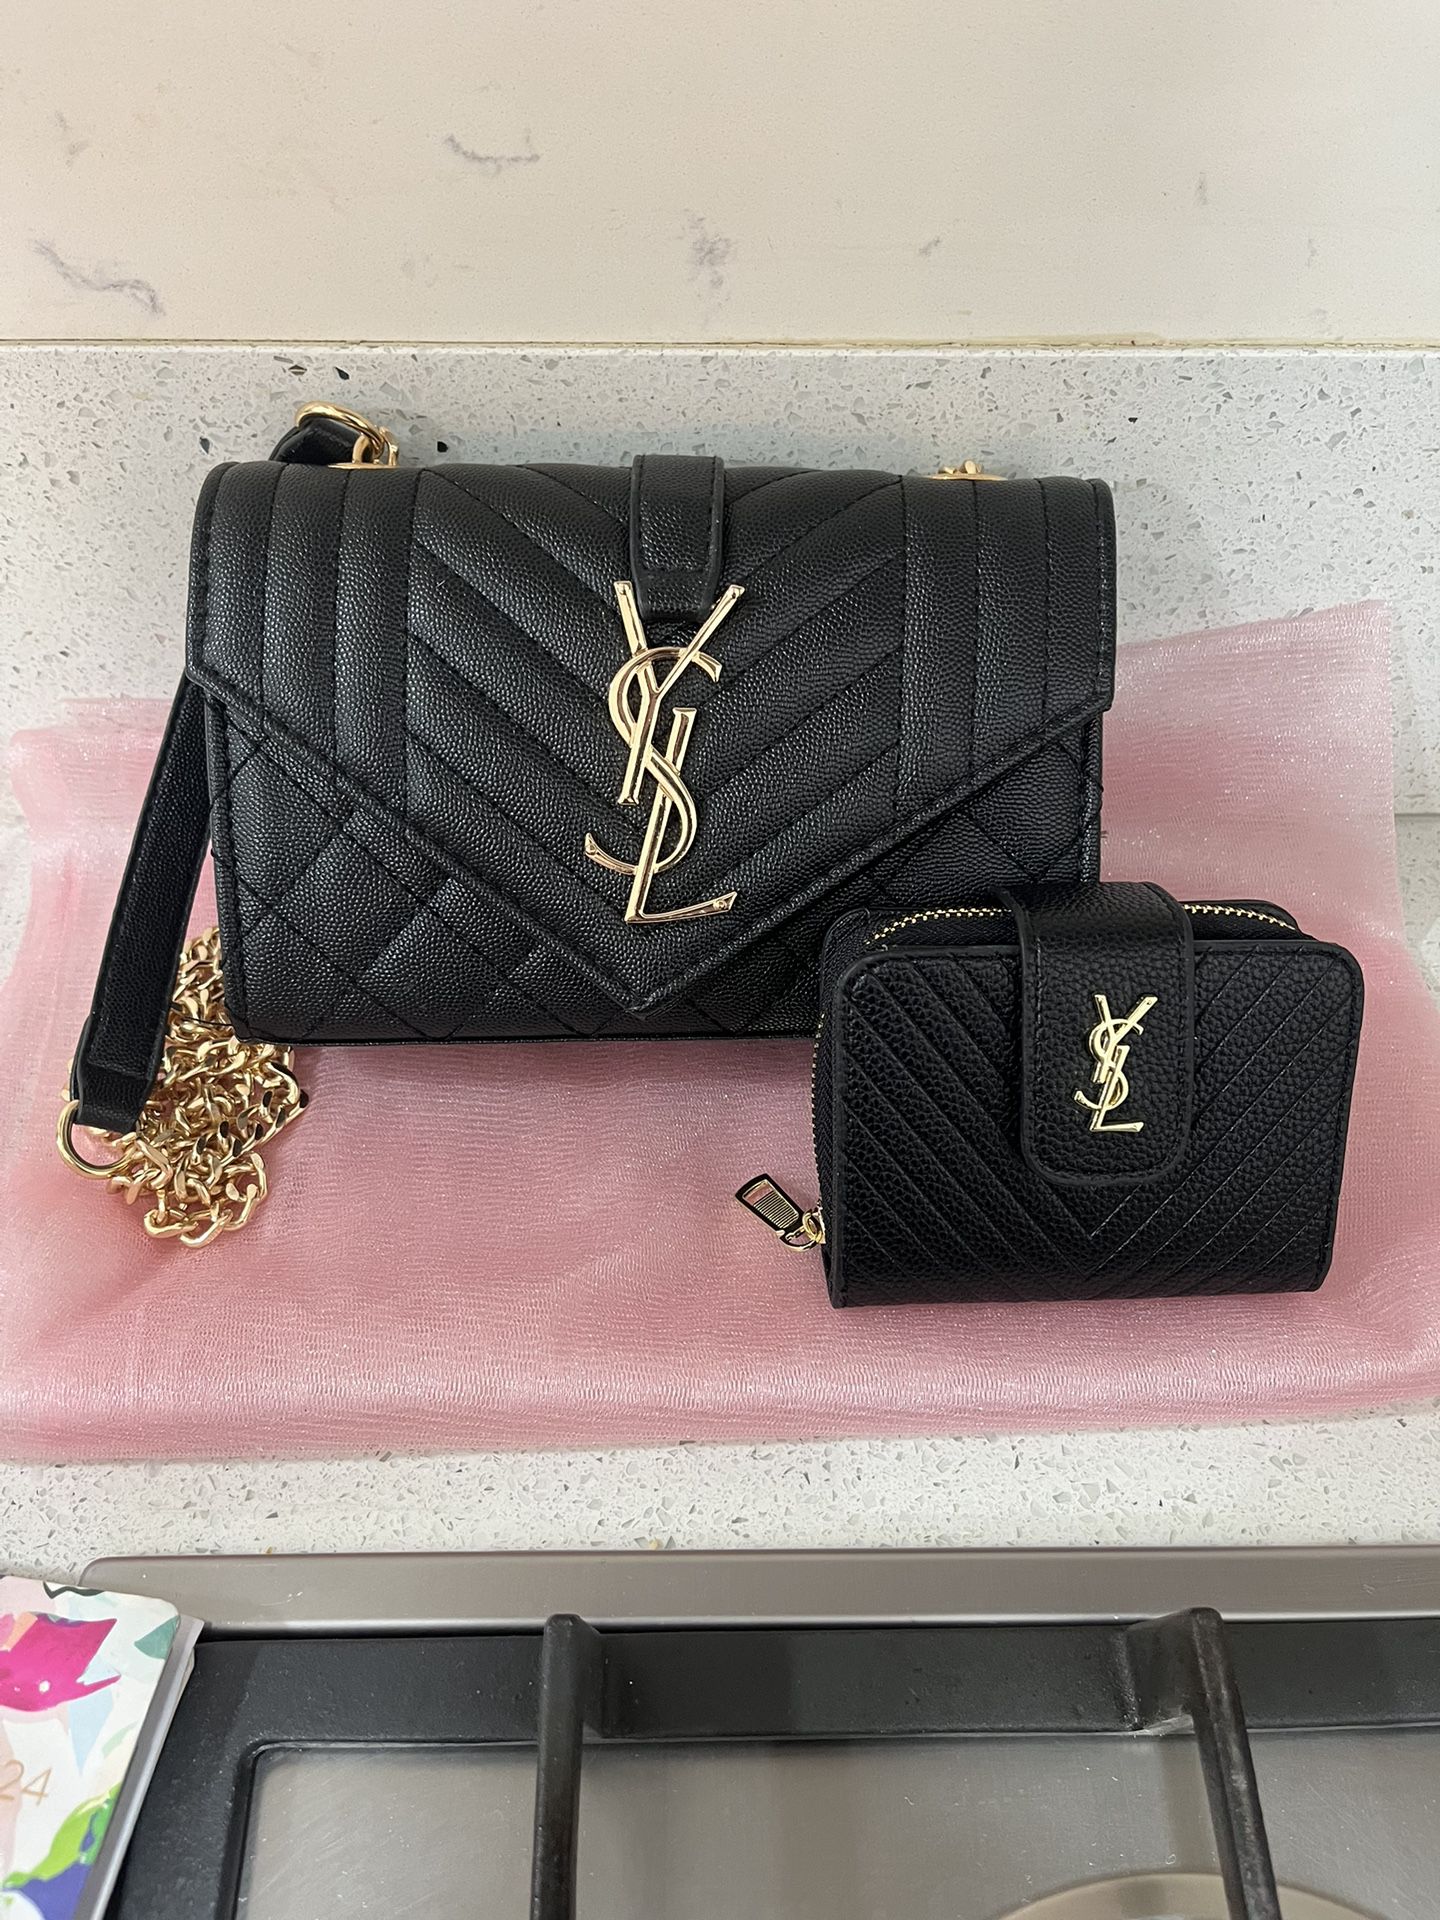 YSL Bag and matching wallet